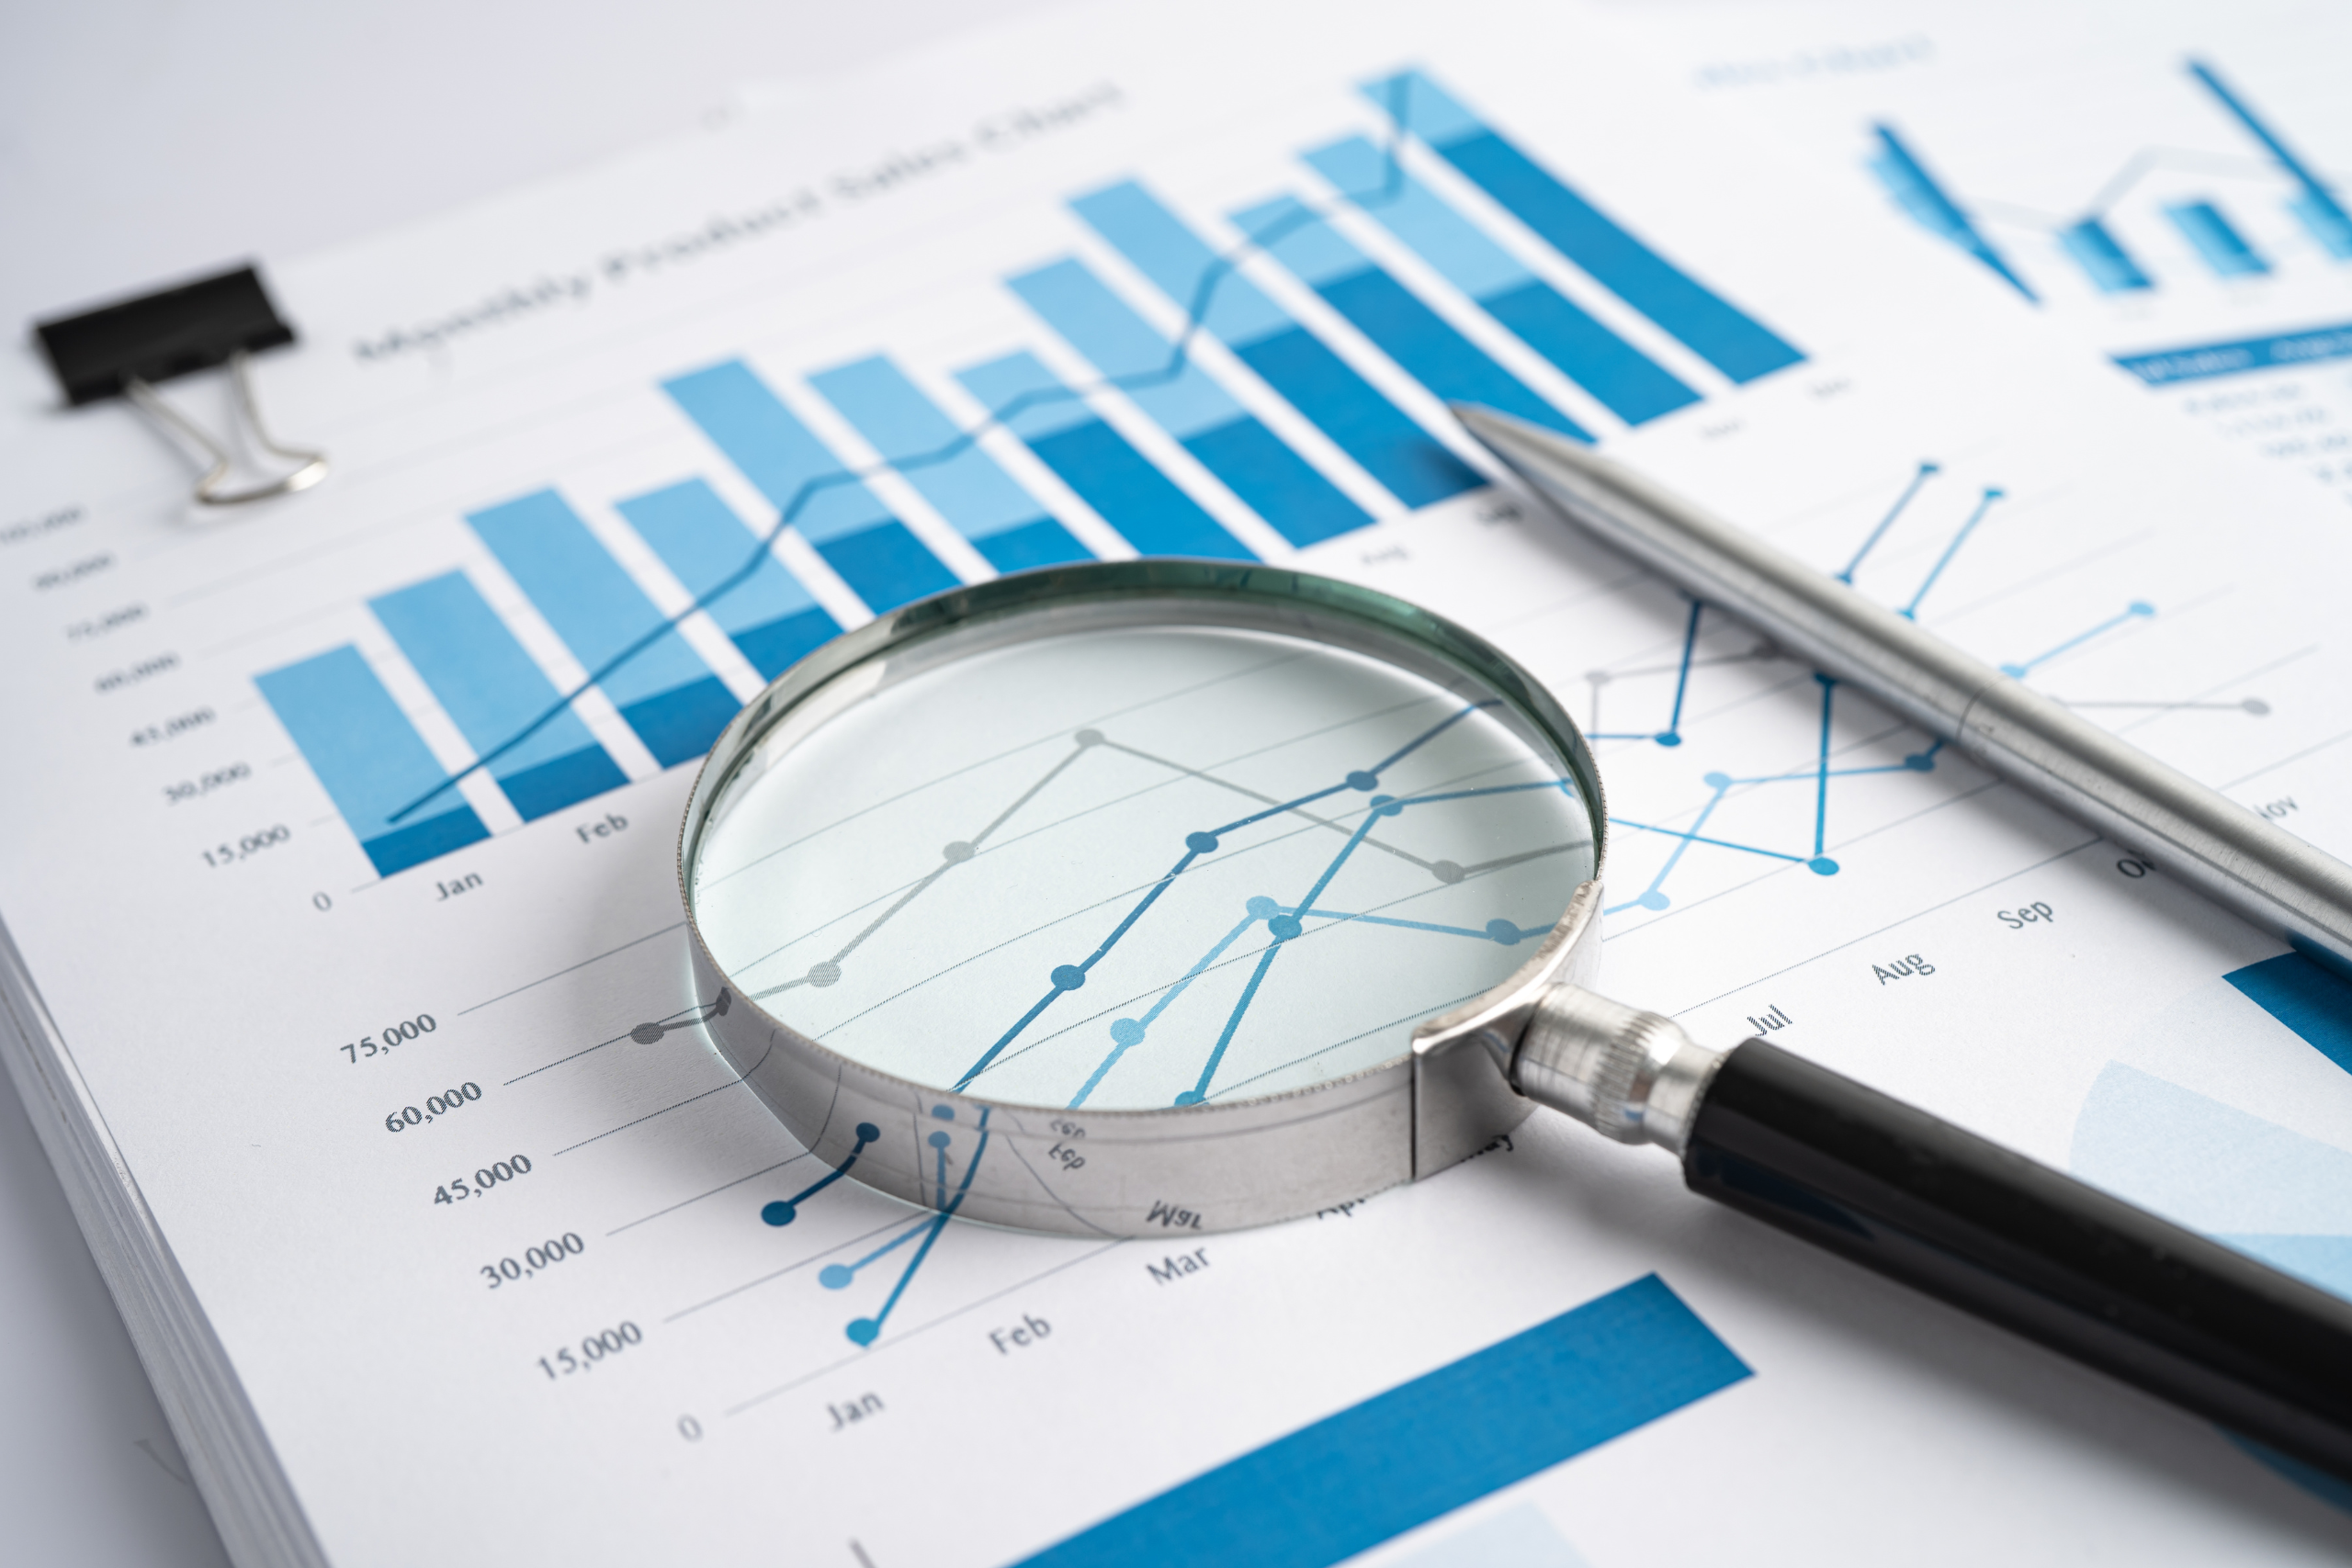 A magnifying glass resting on charts and graphs displaying financial information.